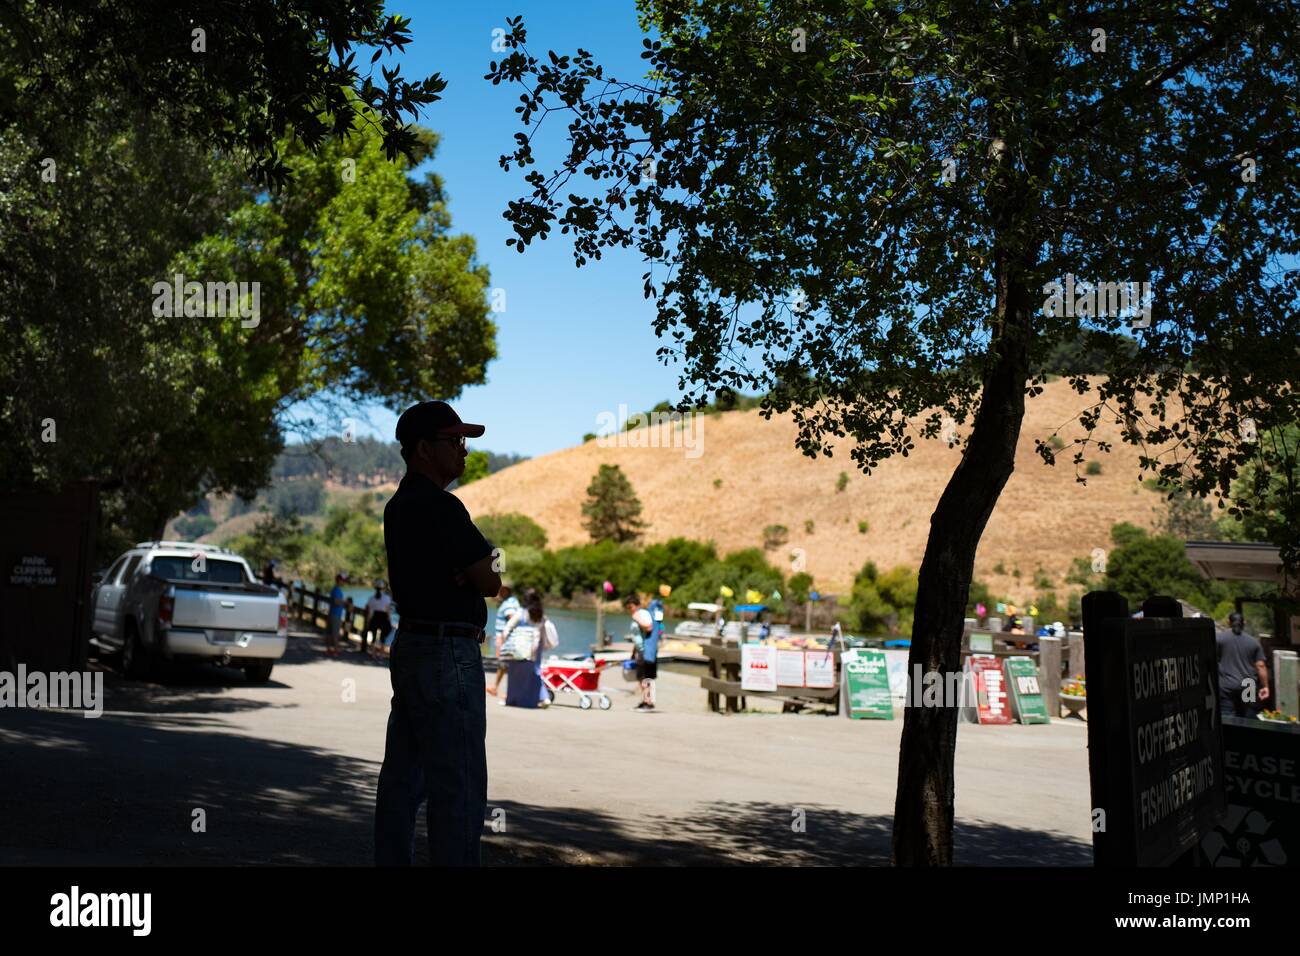 The silhouette of a man crossing his arms is visible as he looks towards the marina at Lake Chabot Regional Park, an East Bay Regional Park, in Castro Valley, California, July 4, 2017. Stock Photo